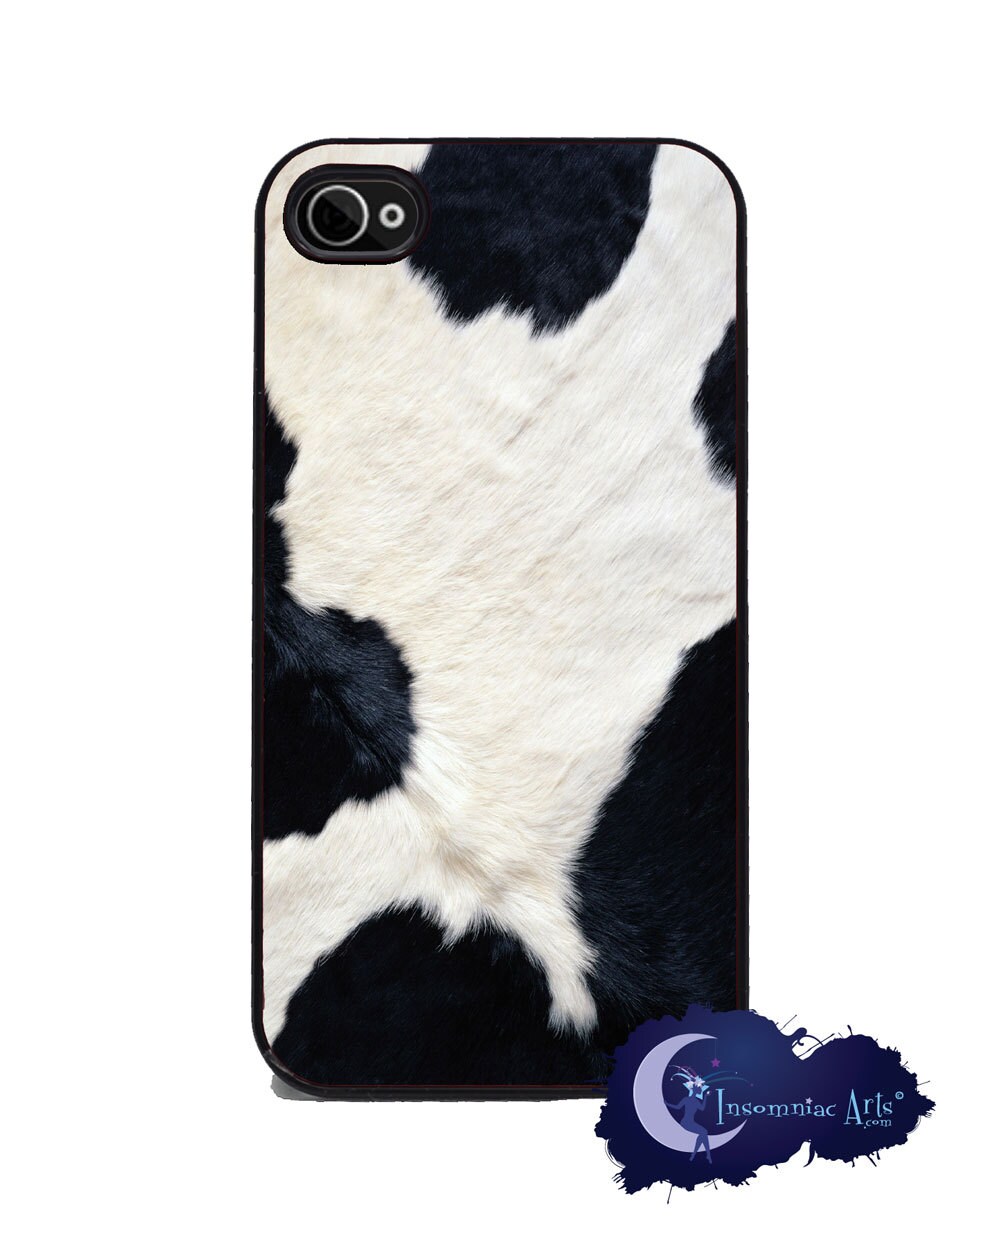 Iphone 4s Covers For Boys